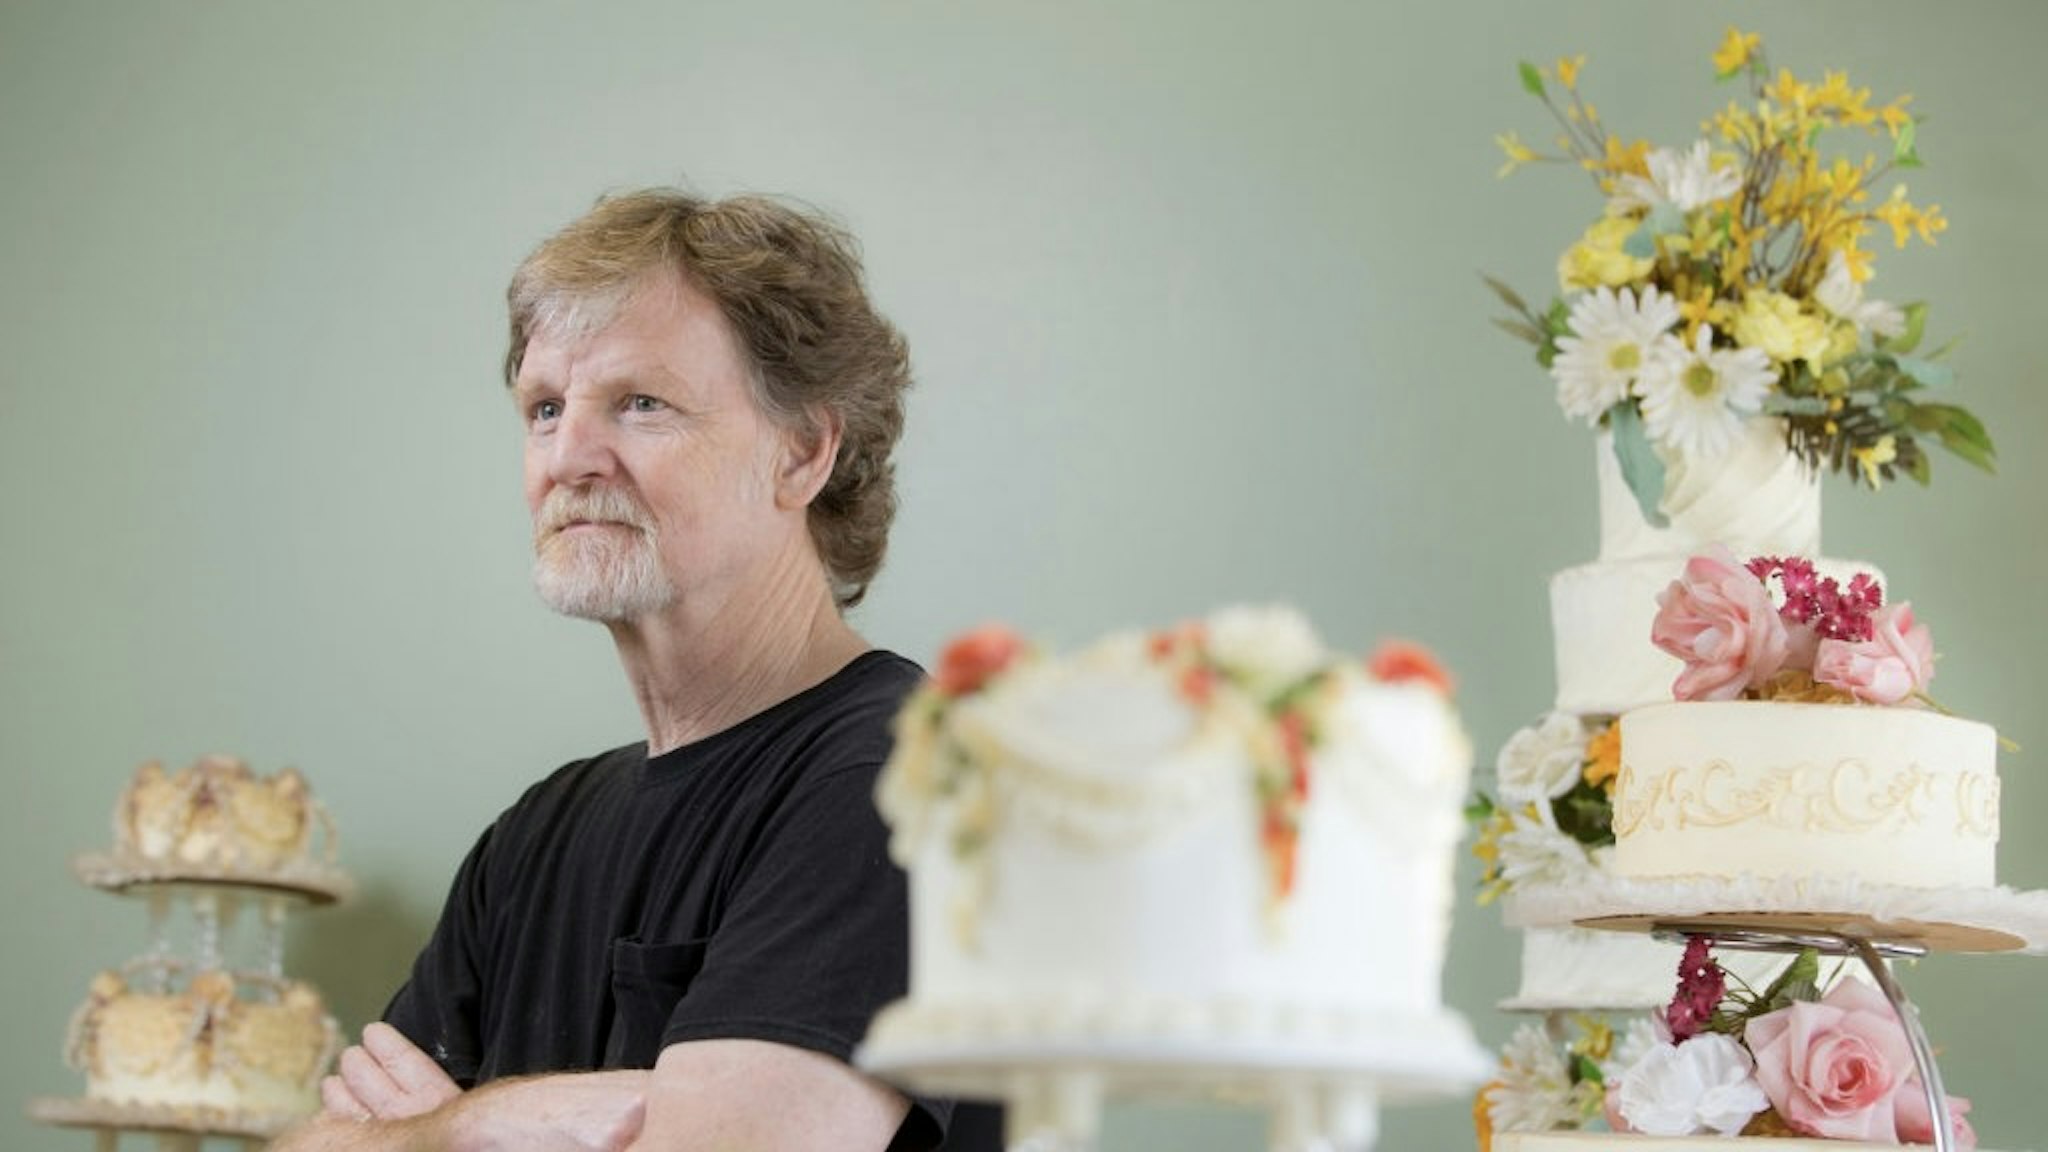 LAKEWOOD, CO - SEPT 1: Jack Phillips stands for a portrait near a display of wedding cakes in his Masterpiece Cakeshop in Lakewood, CO on Thursday, September 1, 2016. Jack Phillips is owner of Masterpiece Cakeshop in Lakewood, Colo., and has a case before the Supreme Court. He is one of the bakers who does not want to bake wedding cakes for same-sex couples, saying it violates his religious beliefs, and has been found in violation of Colorado law. (Photo by Matthew Staver/For The Washington Post via Getty Images) Slug: JACKPHILLIPS